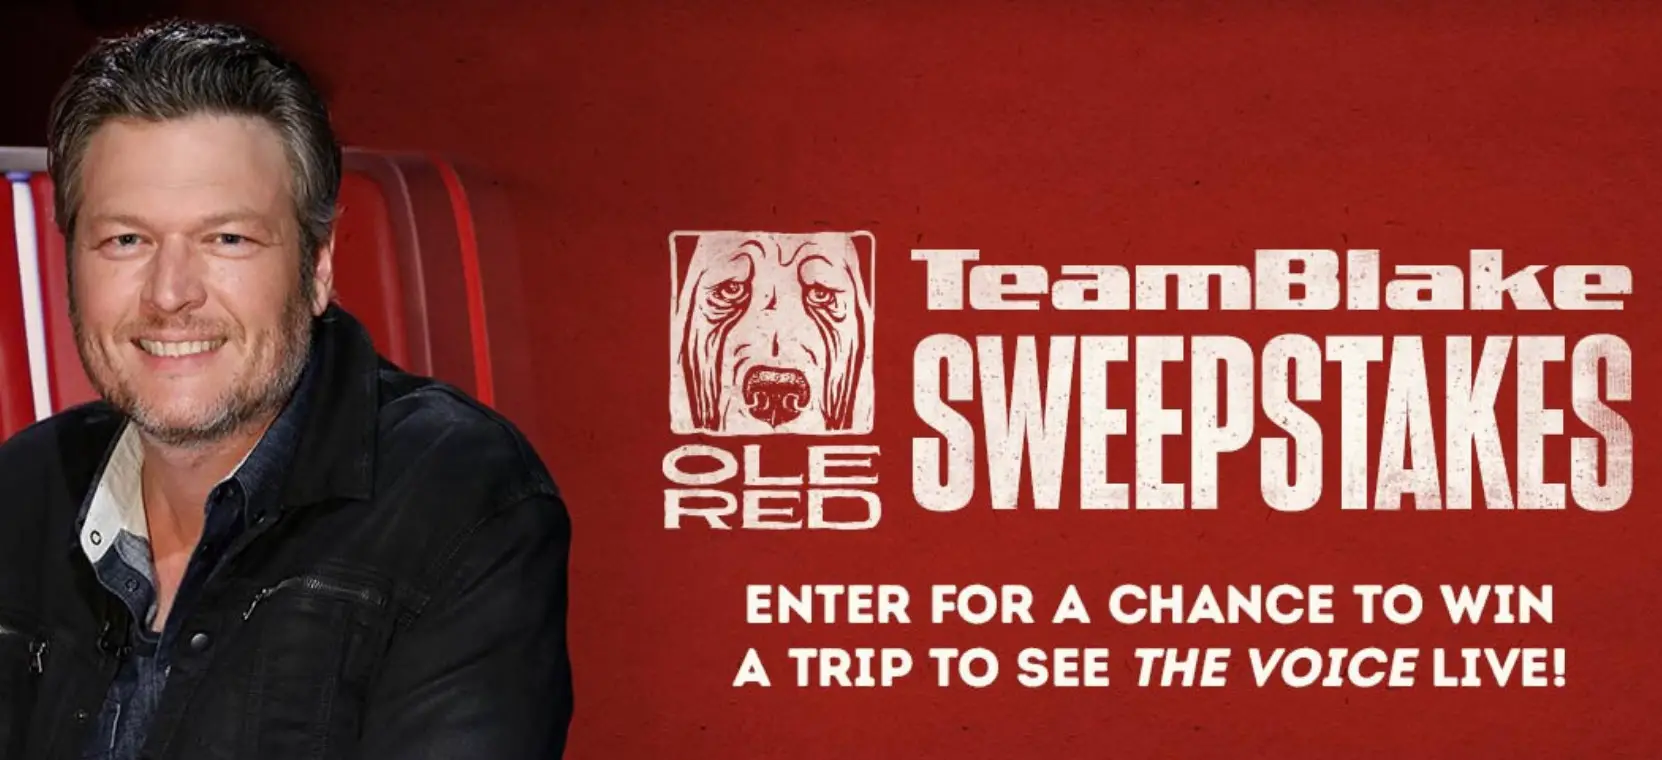 Enter for your chance to win a trip to see NBC's The Voice Live in Hollywood in December when you enter Ole Red's Team Blake Flyaway Sweepstakes. Enter for a chance to win a trip to see a live episode of The Voice, including round trip air travel for two (2) aboard Southwest Airlines, hotel accommodations, and more!